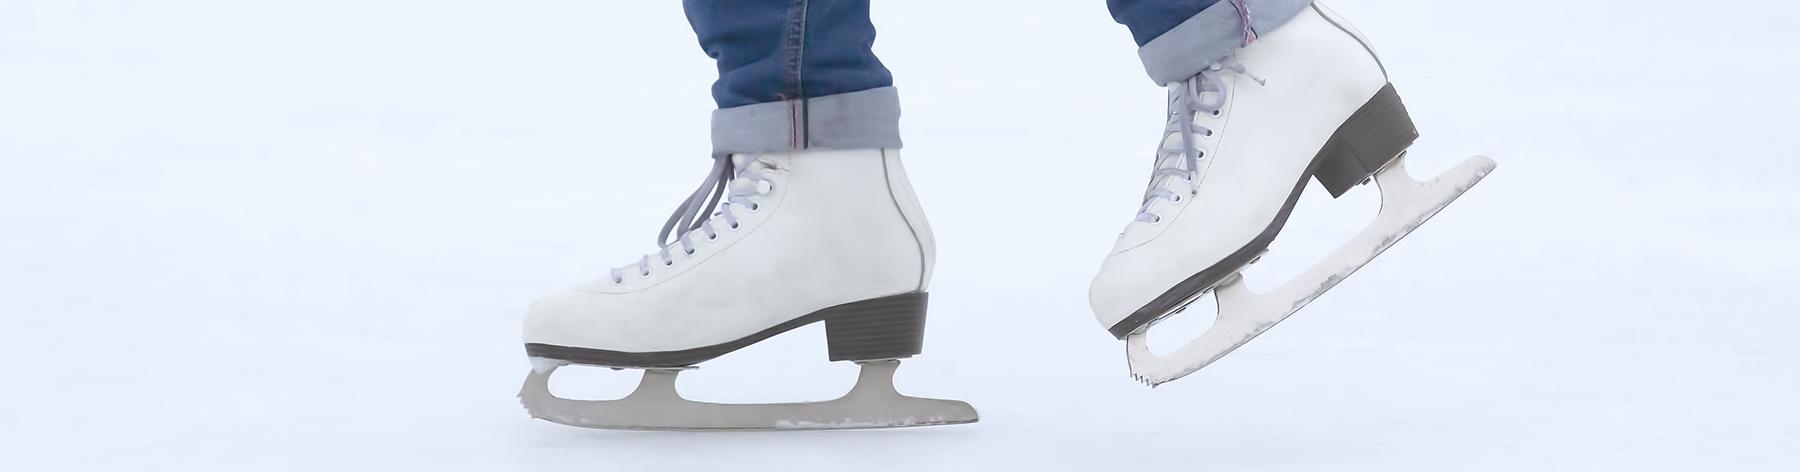 where can i get ice skates